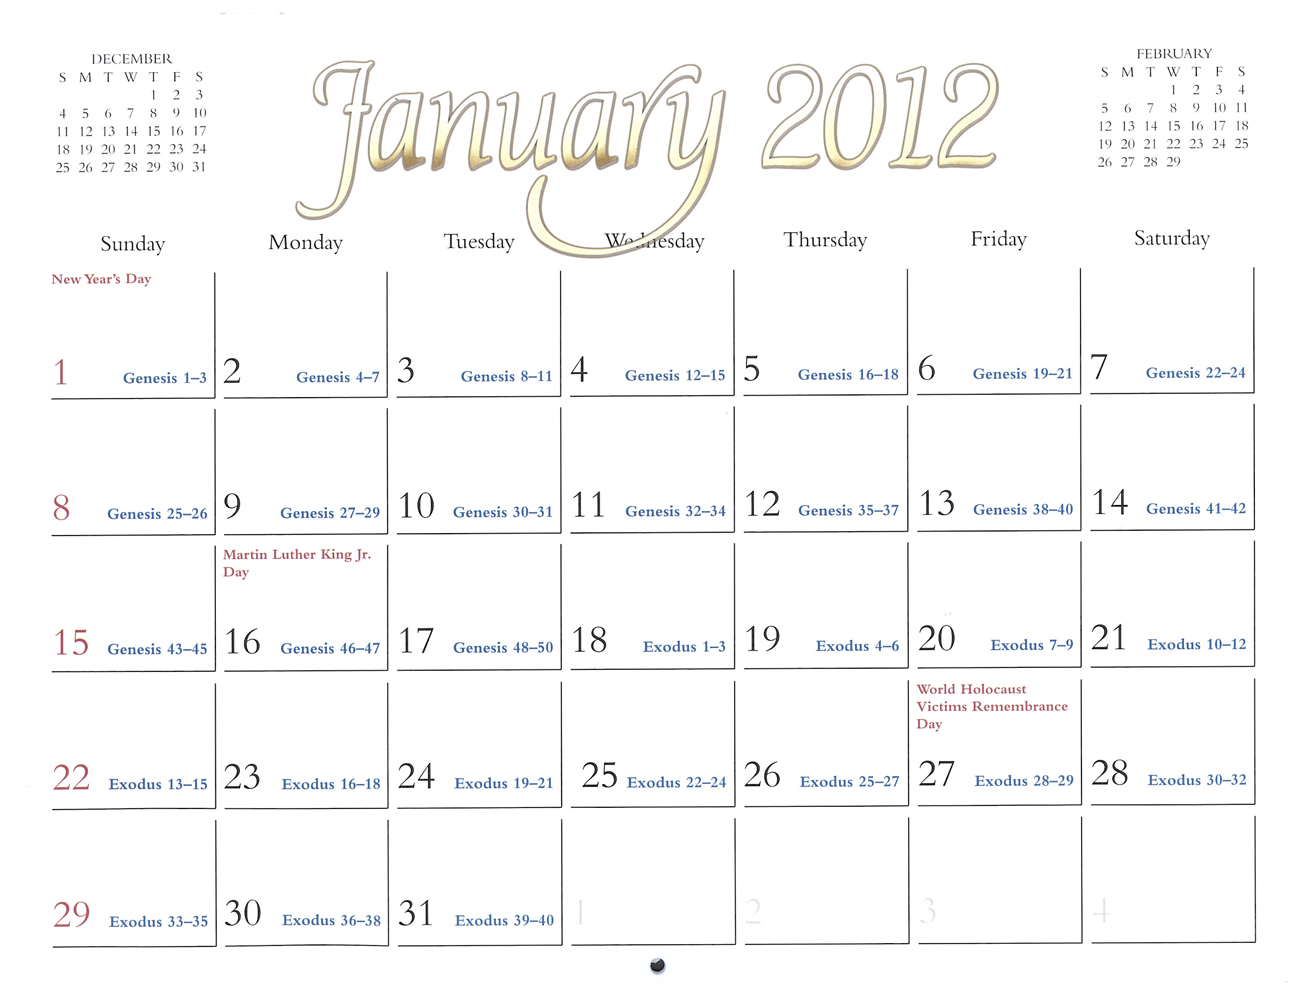 2012 Prophecy Calendar: January - Paul's Letter to Christians in Rome